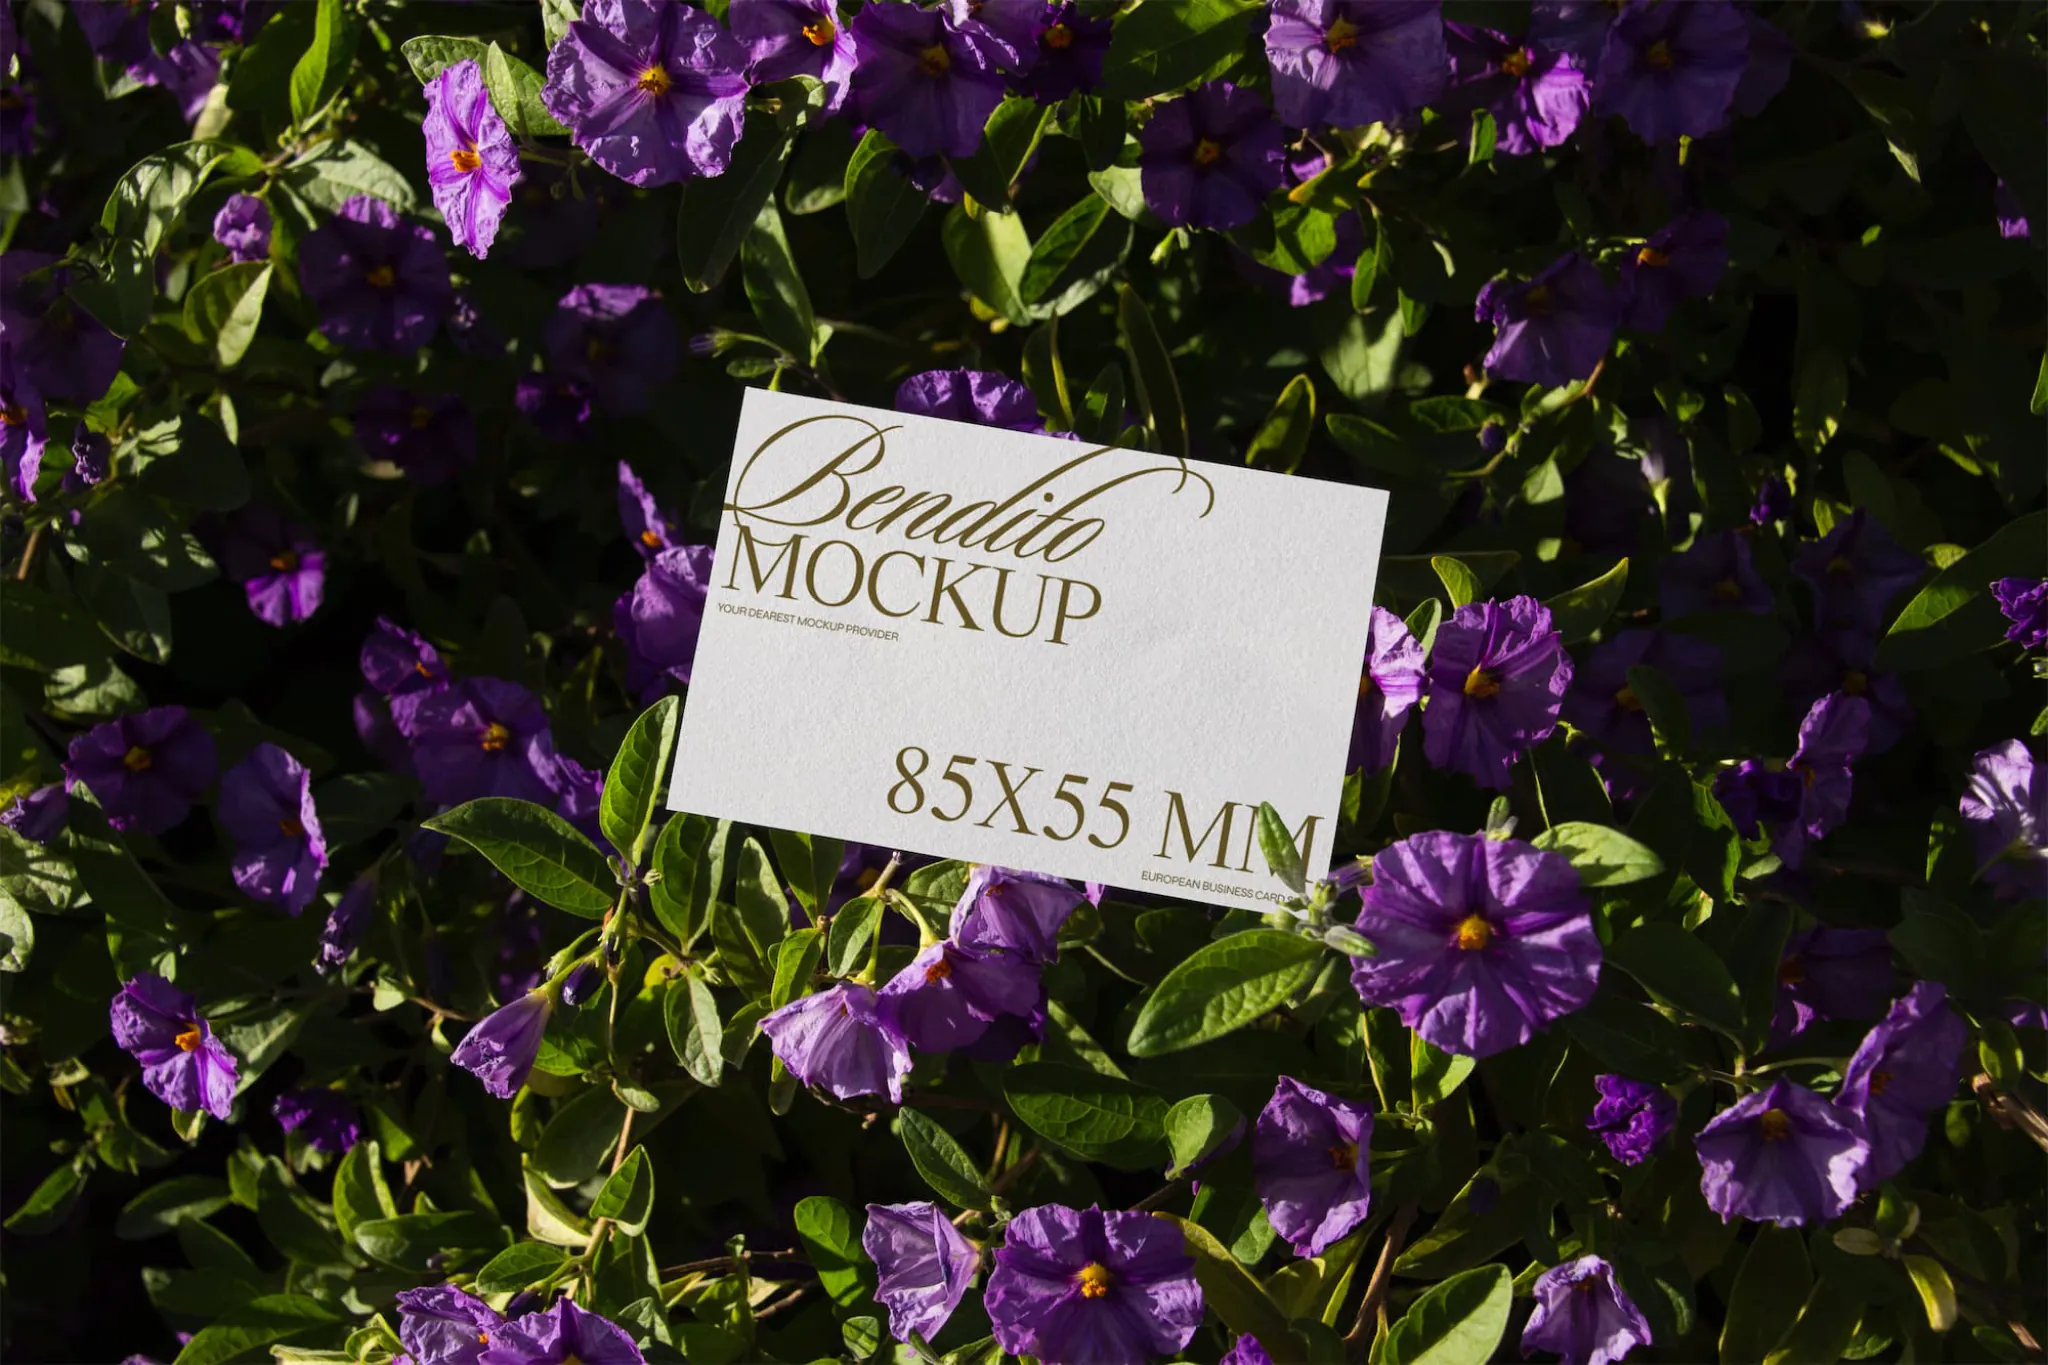 Business card mockup with floral background.